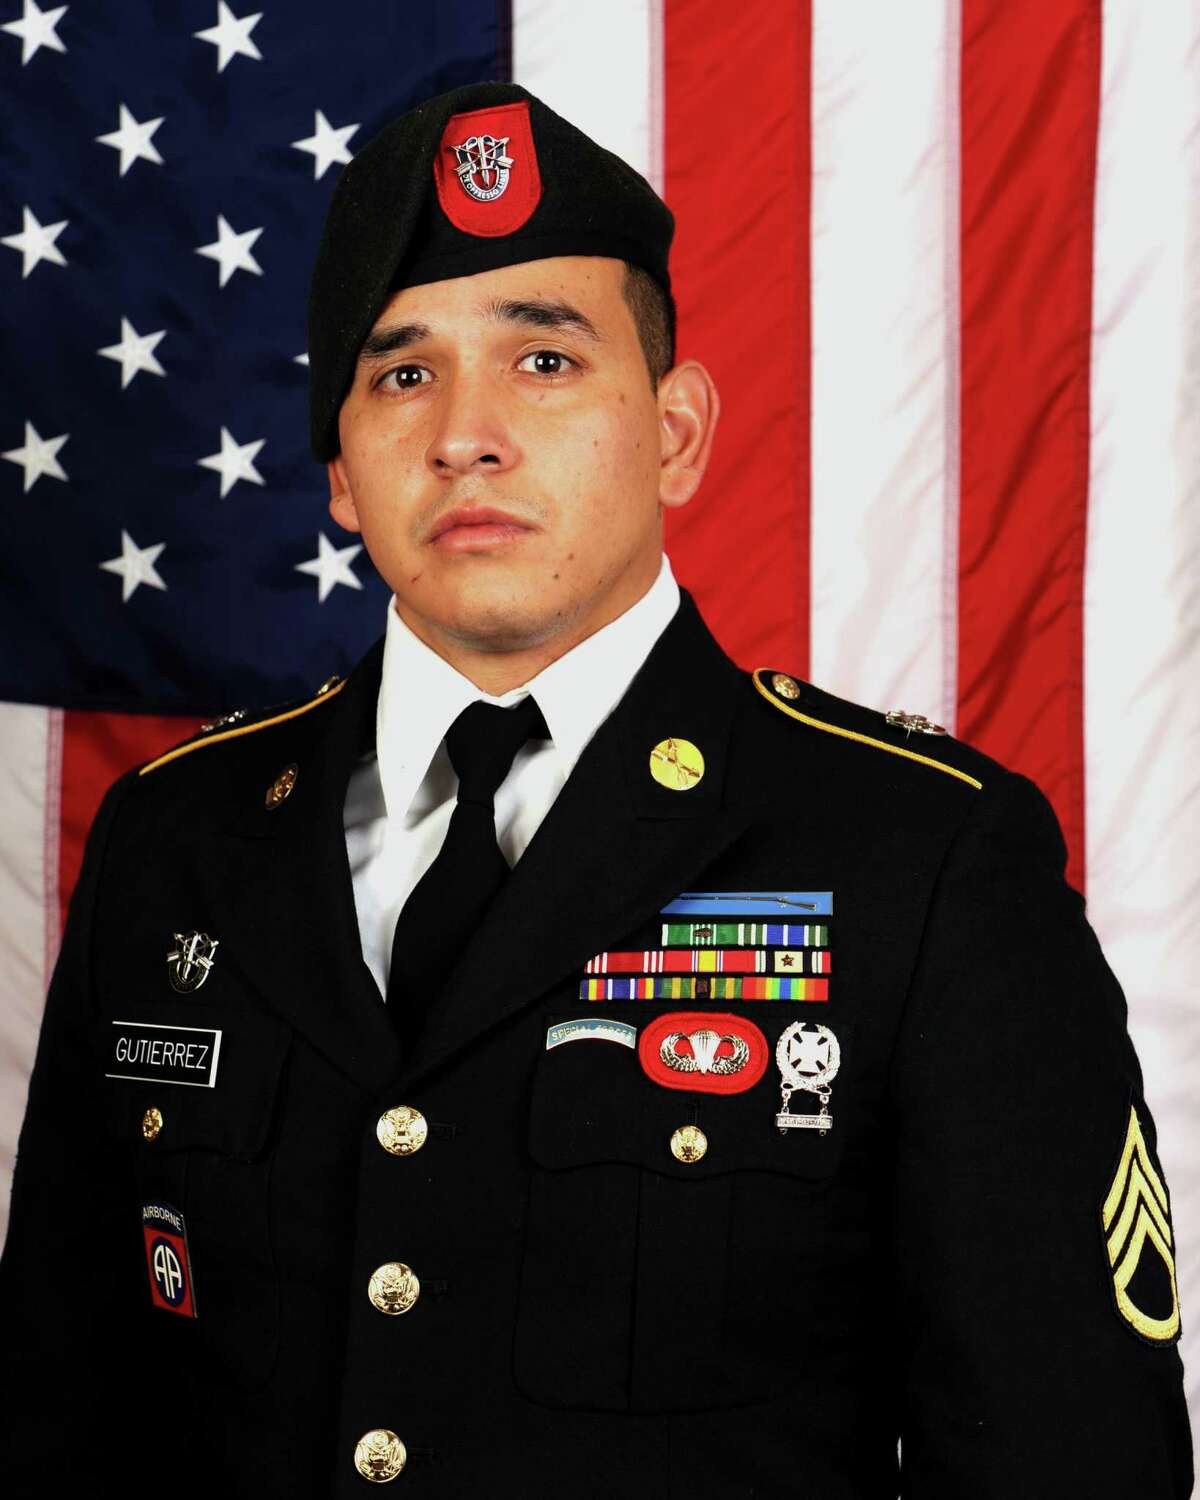 Sgt. 1st Class Javier J. Gutierrez, 28, of San Antonio, seen in an undated courtesy photo provided Sunday, Feb. 9, 2020, died Feb. 8, from wounds sustained during combat operations in Nangarhar Province, Afghanistan.